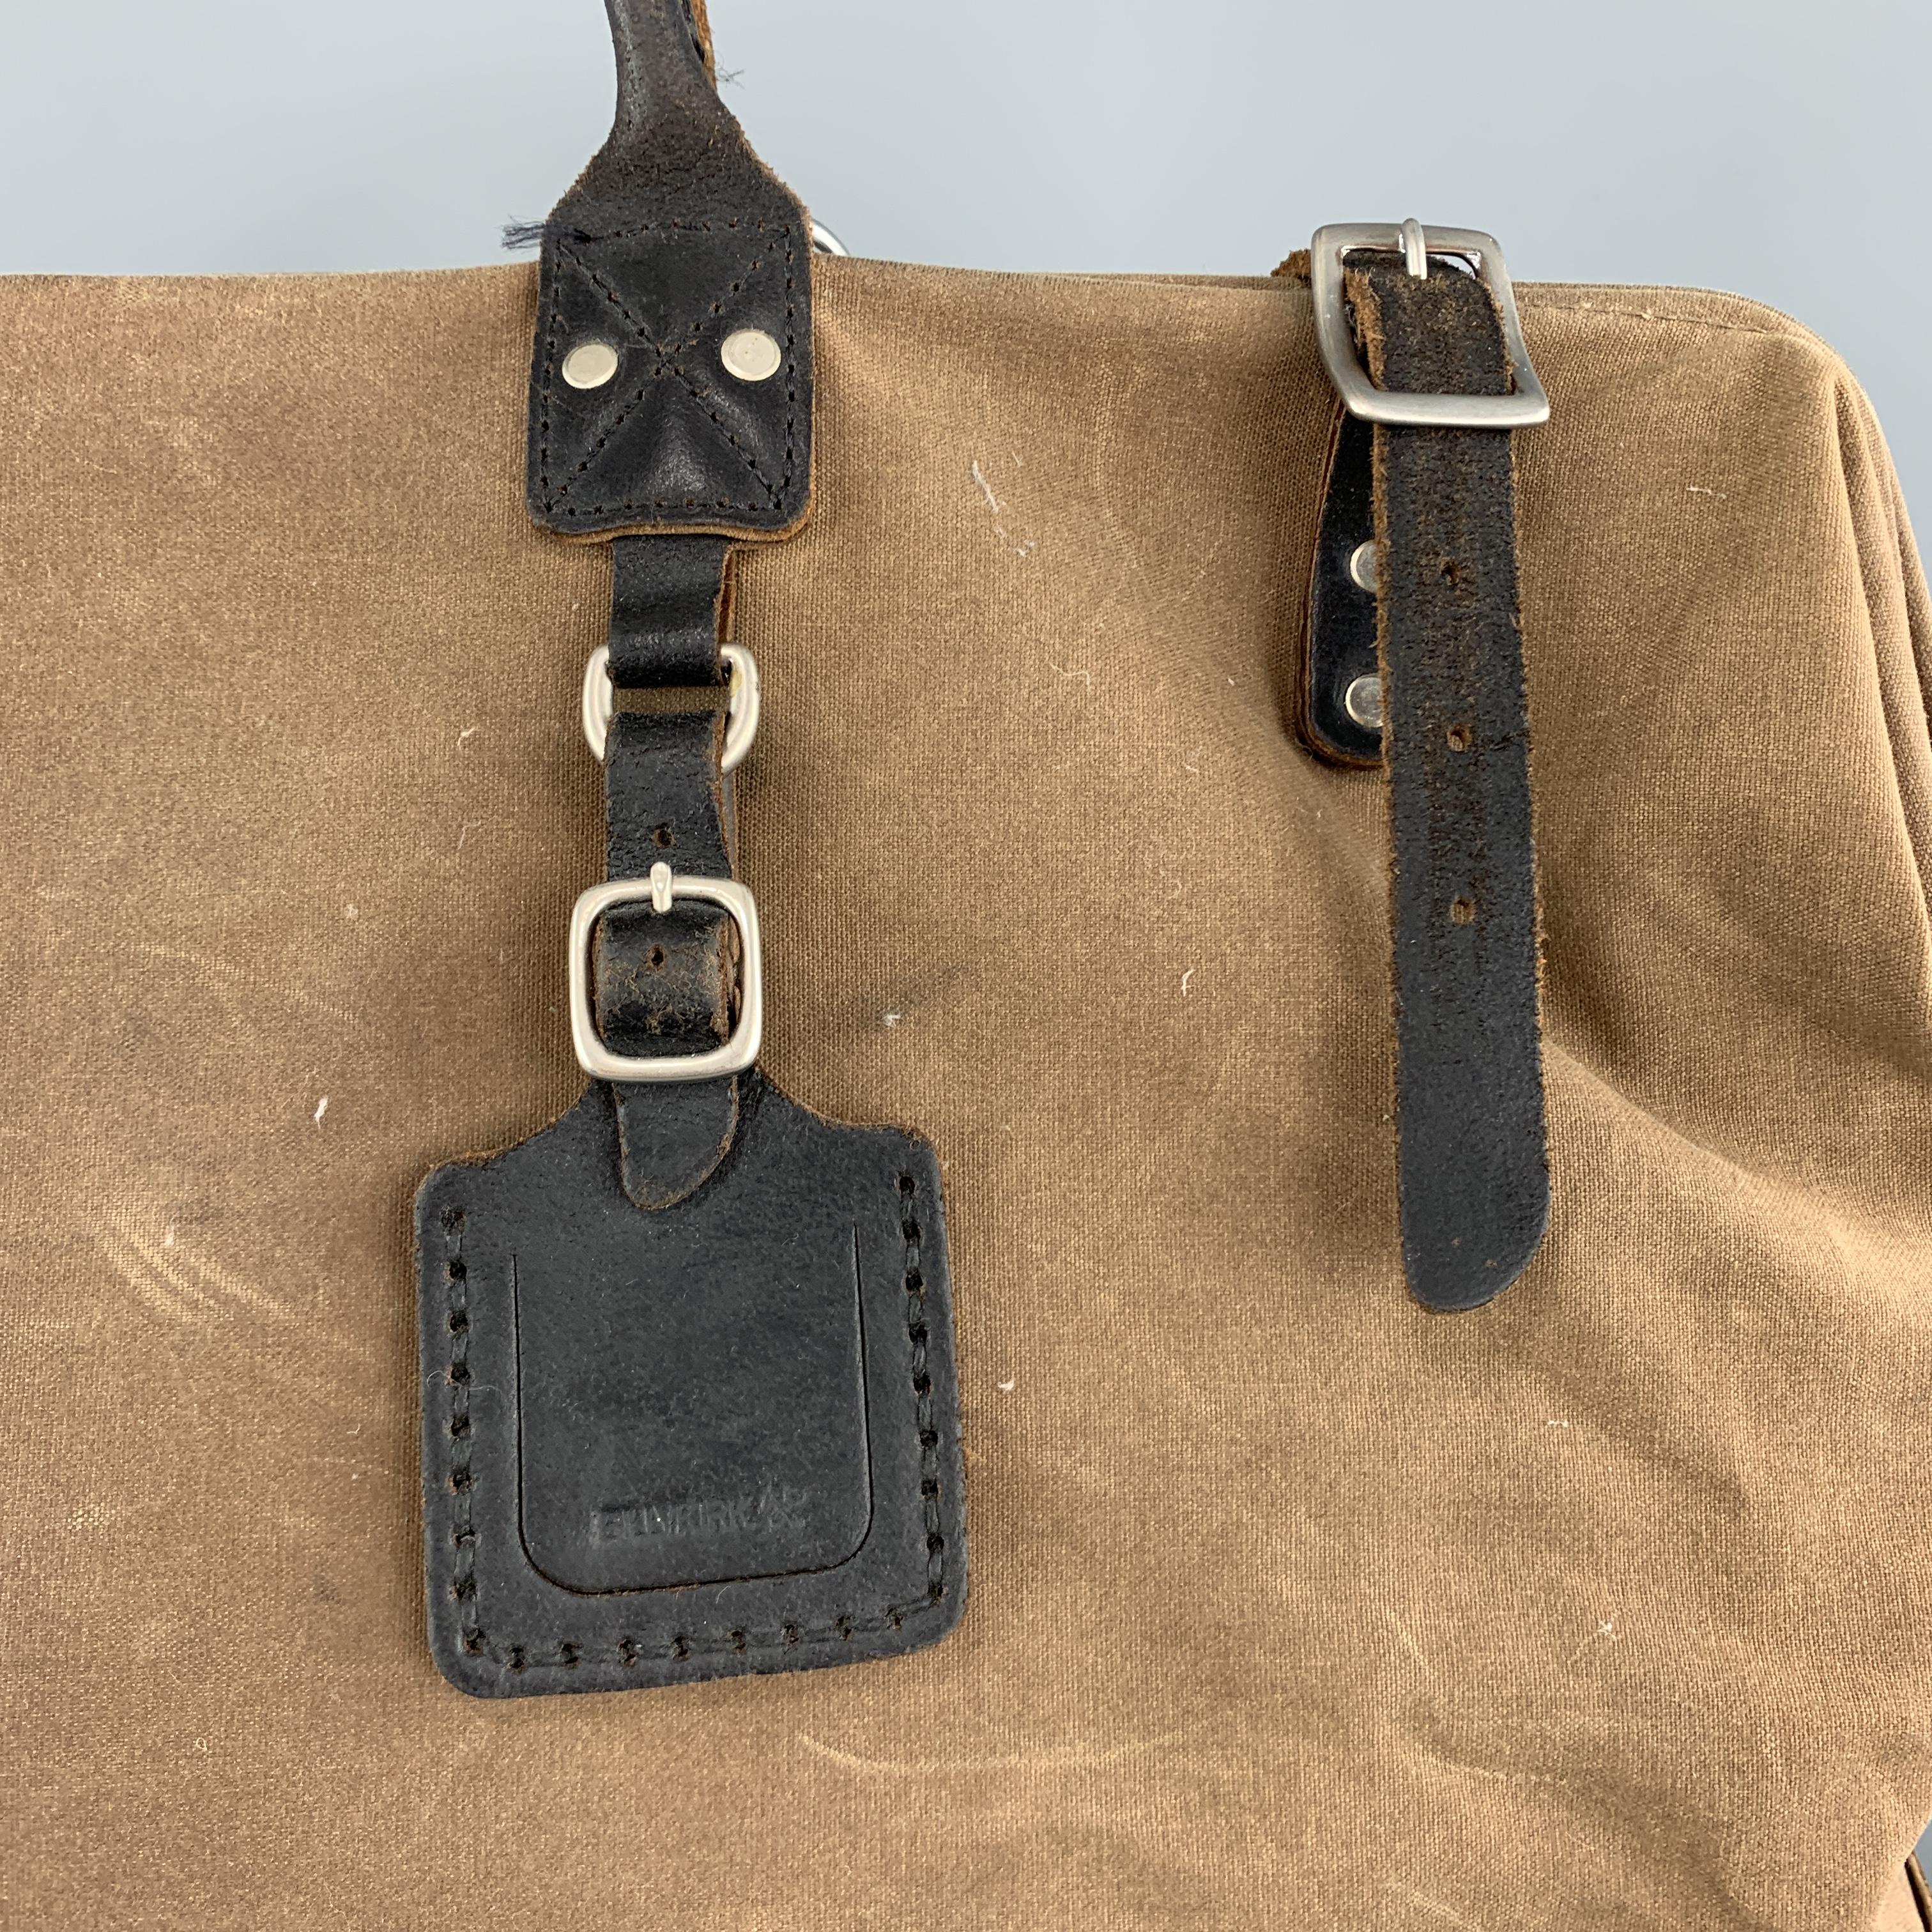 BILLY KIRK work style bag comes in distressed taupe canvas with a hinge top closure, double top handles, black leather bottom panel, detachable strap, and inner pocket. Made in USA.

Good Pre-Owned Condition.

Measurements:

Length: 20 in.
Width: 7